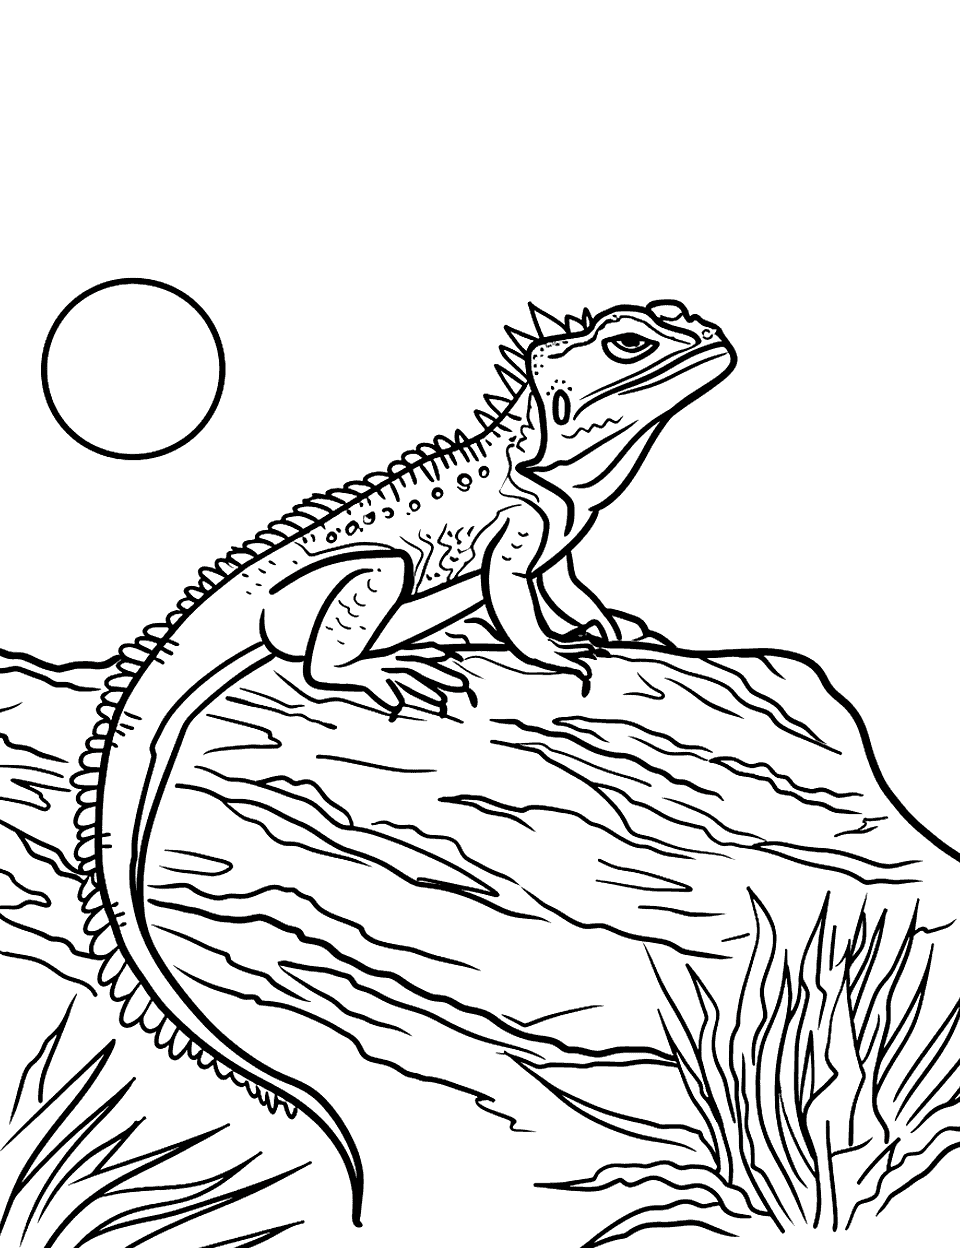 Horned Lizard Watching Sunrise Coloring Page - A horned lizard on a rock, watching the sunrise over a simple horizon.